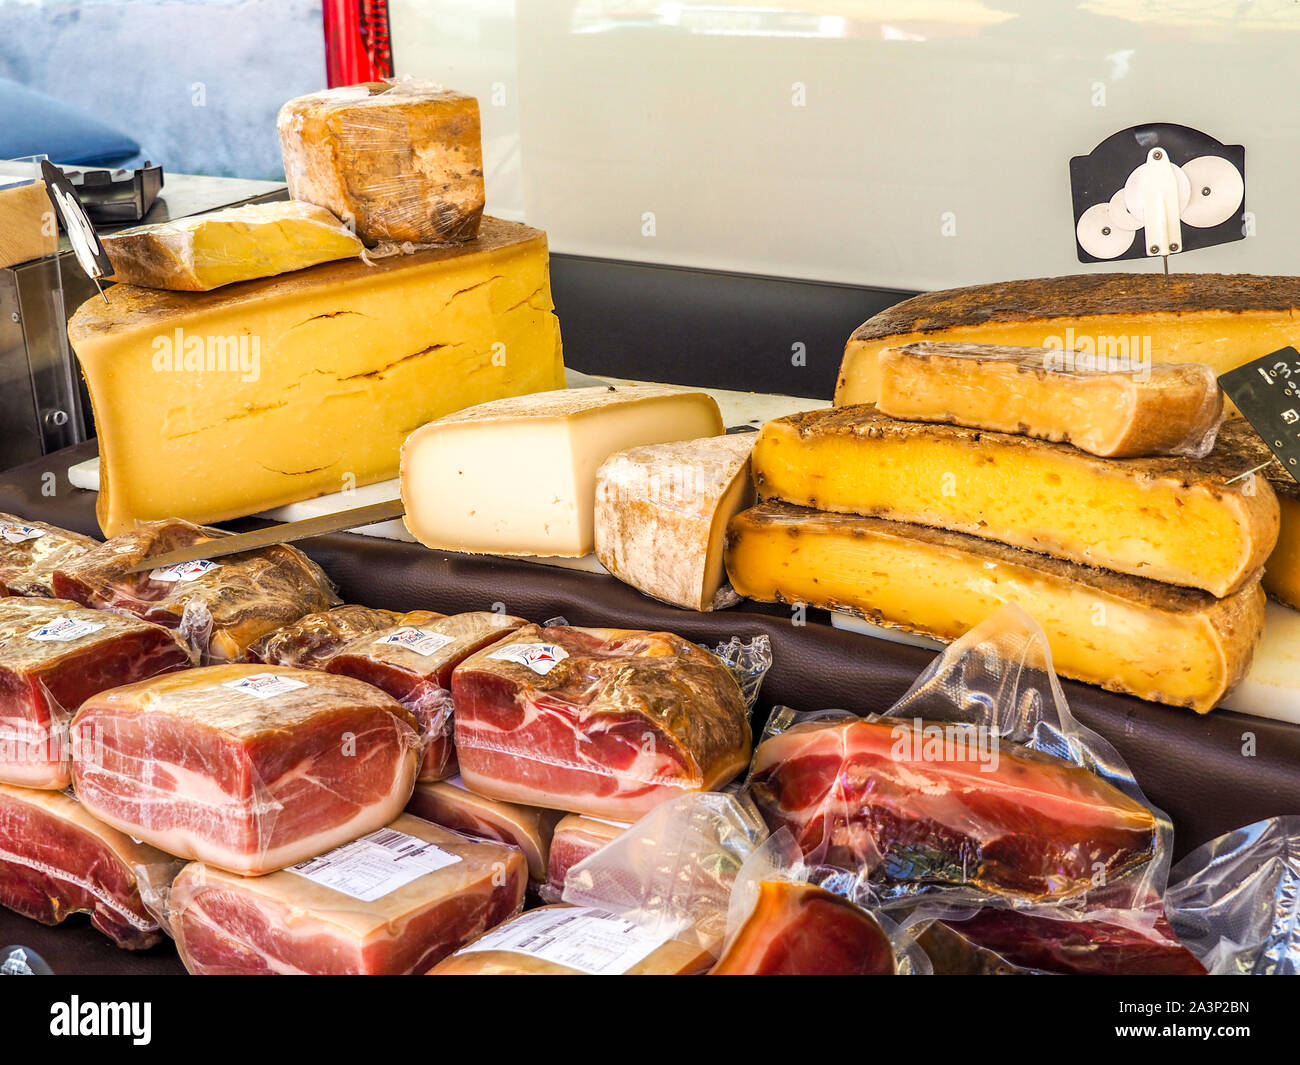 Meats and cheeses on sale at fresh produce market in Provence. Stock Photo